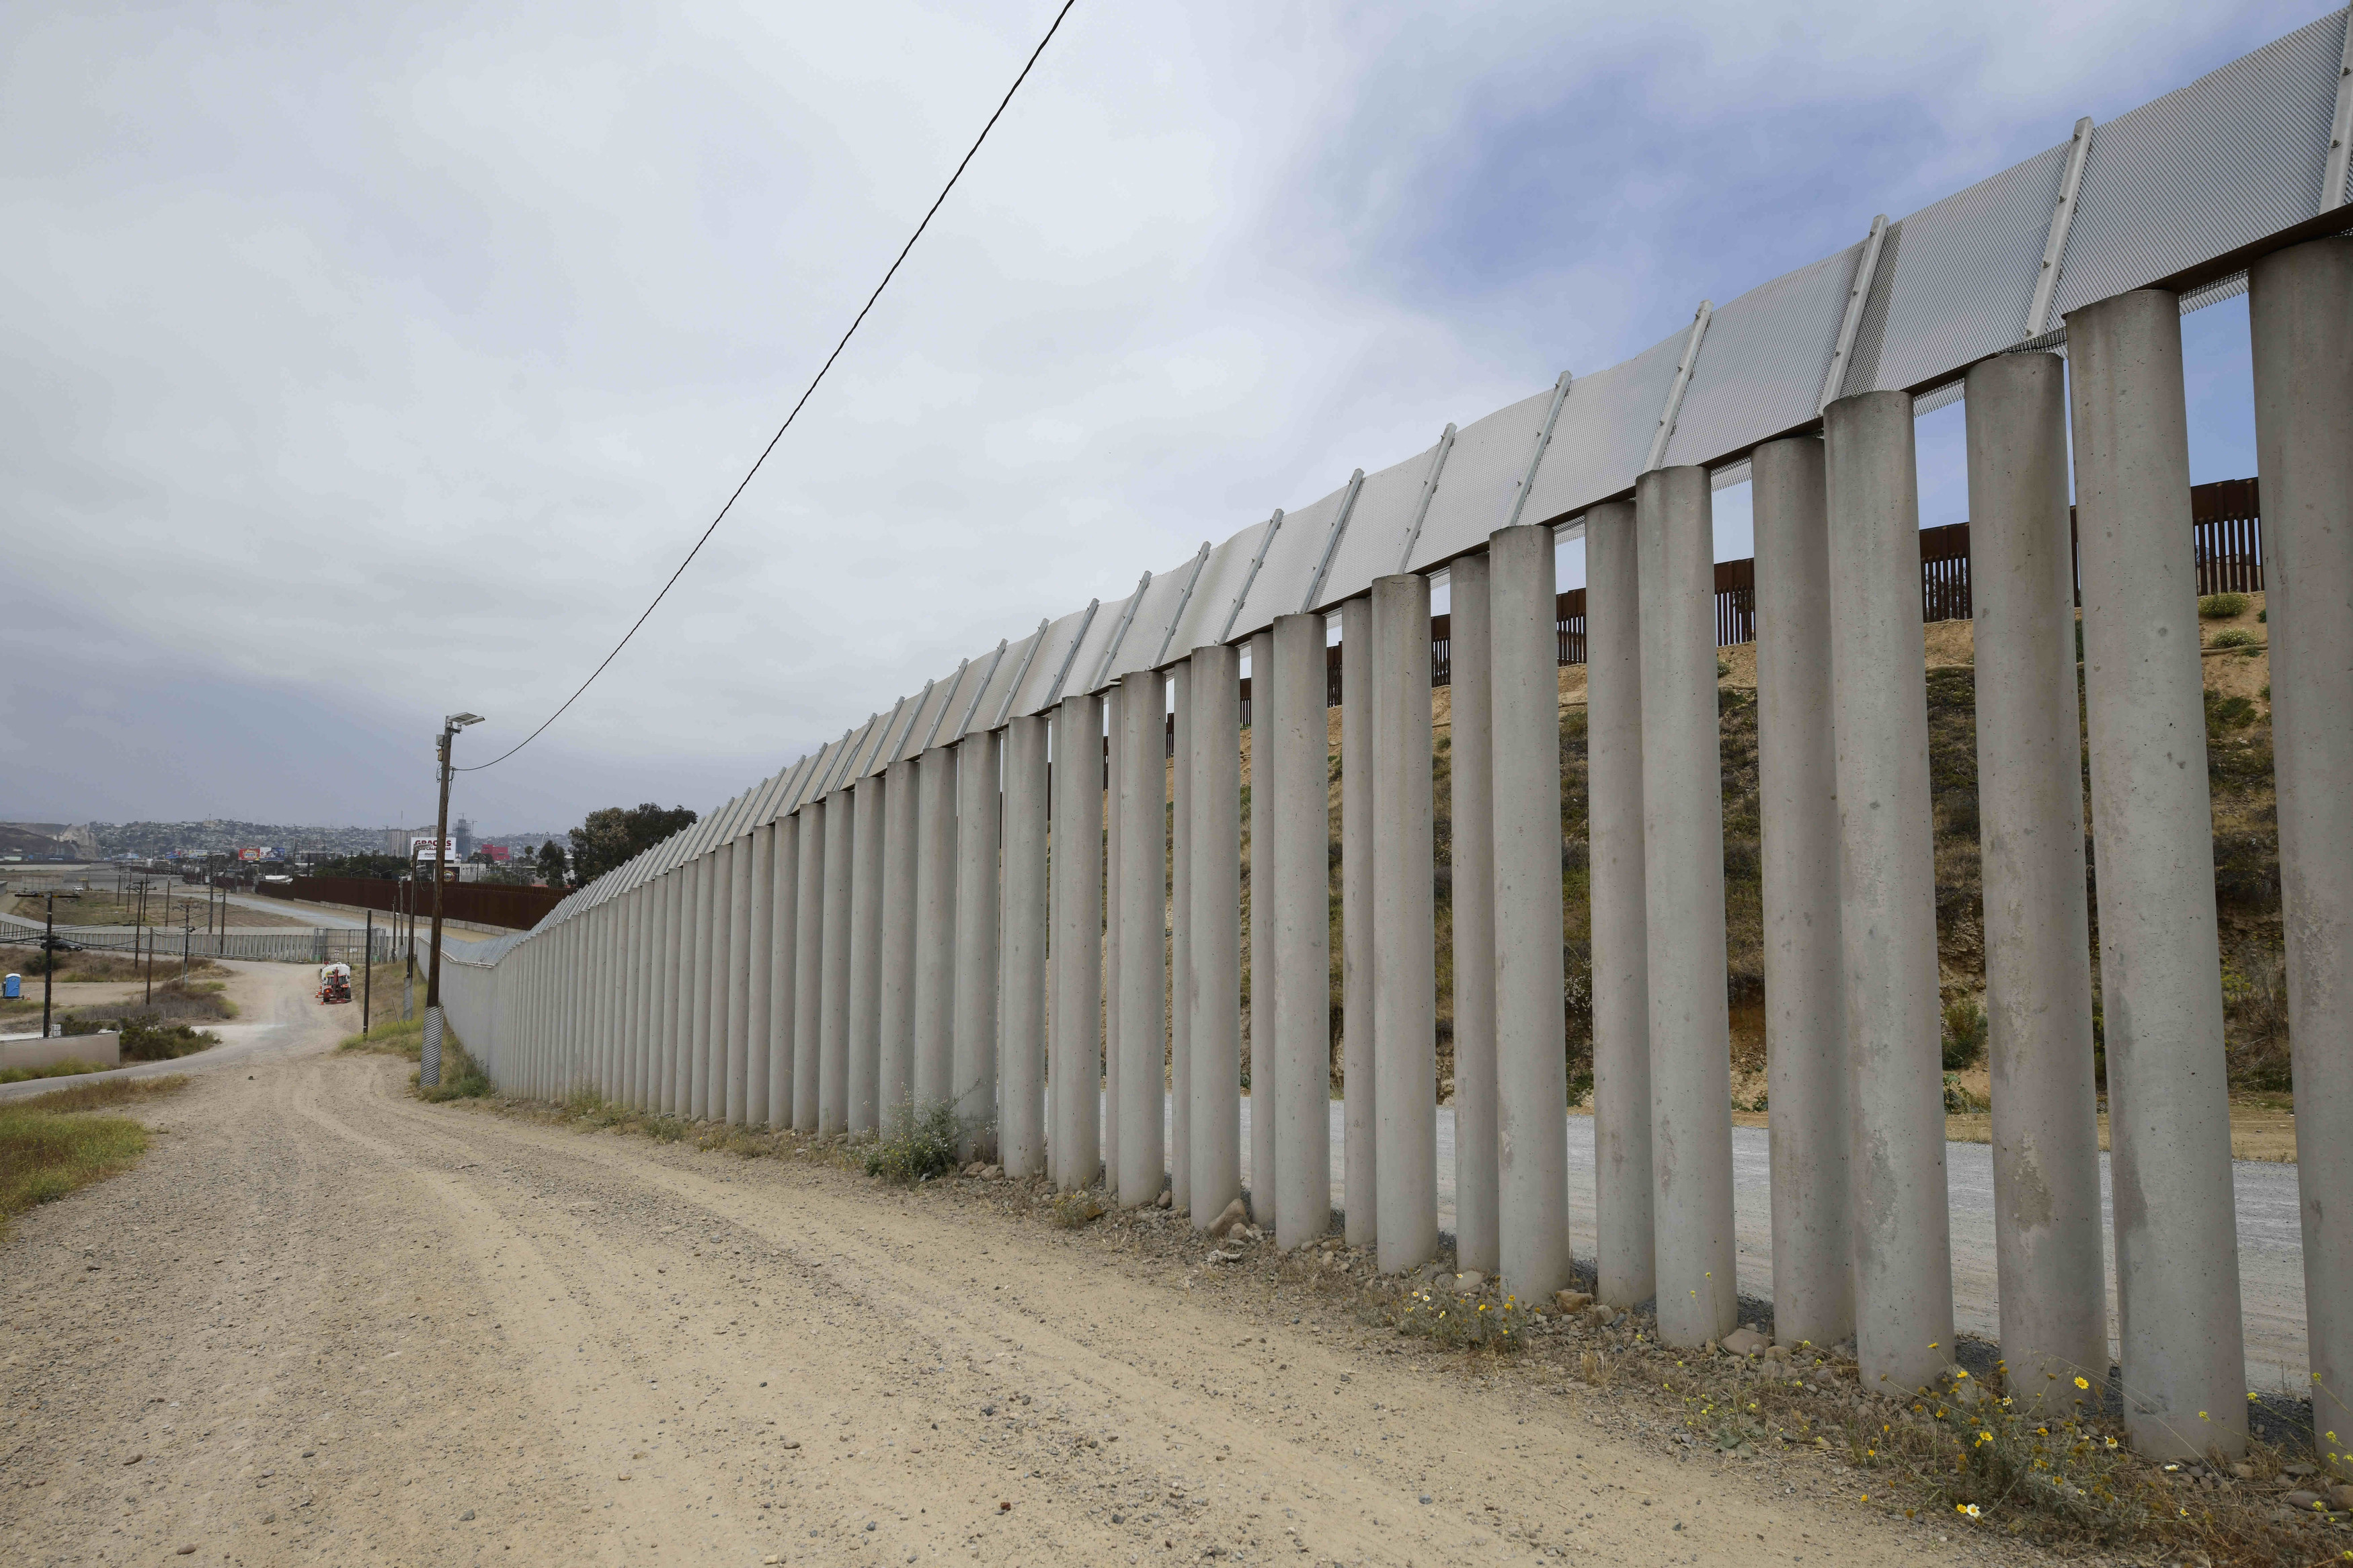 Covid-19: World’s busiest border falls quiet with millions of Mexicans barred from US